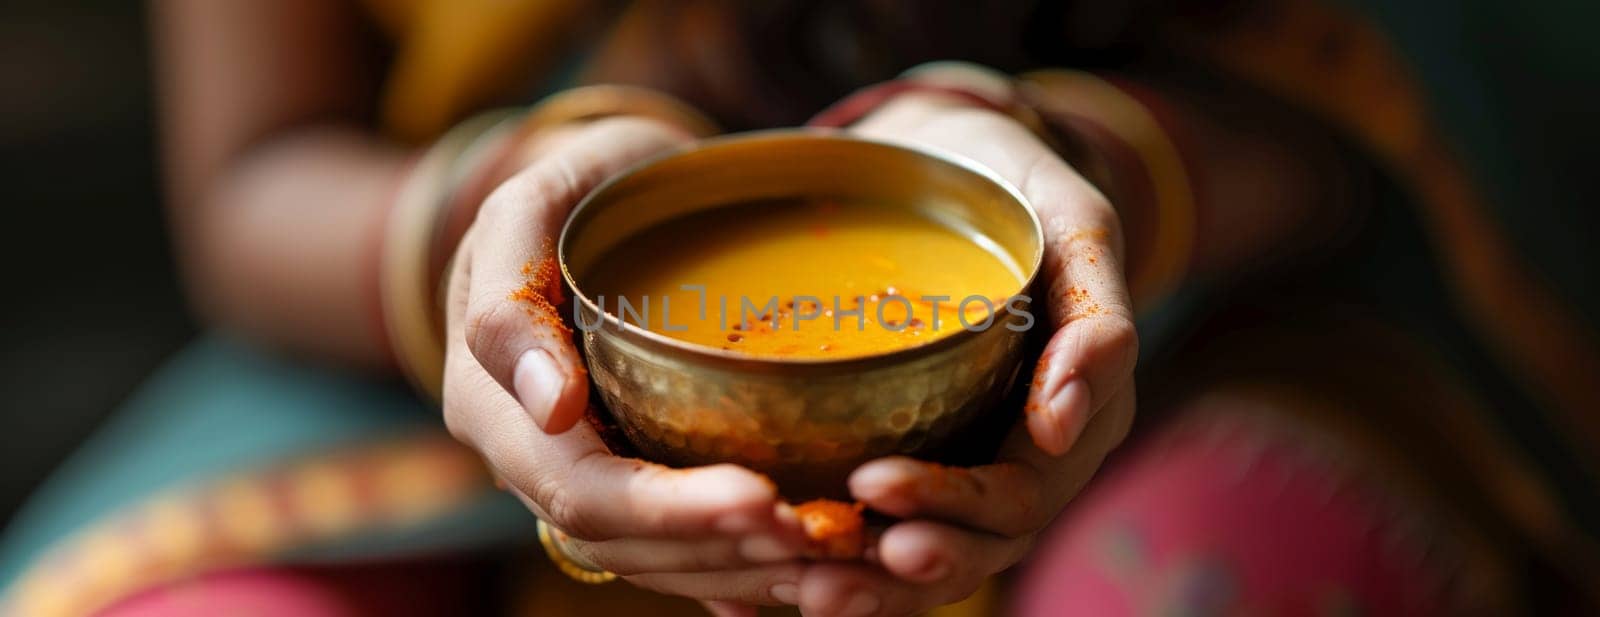 Indian woman hands holding dish of harira soup.